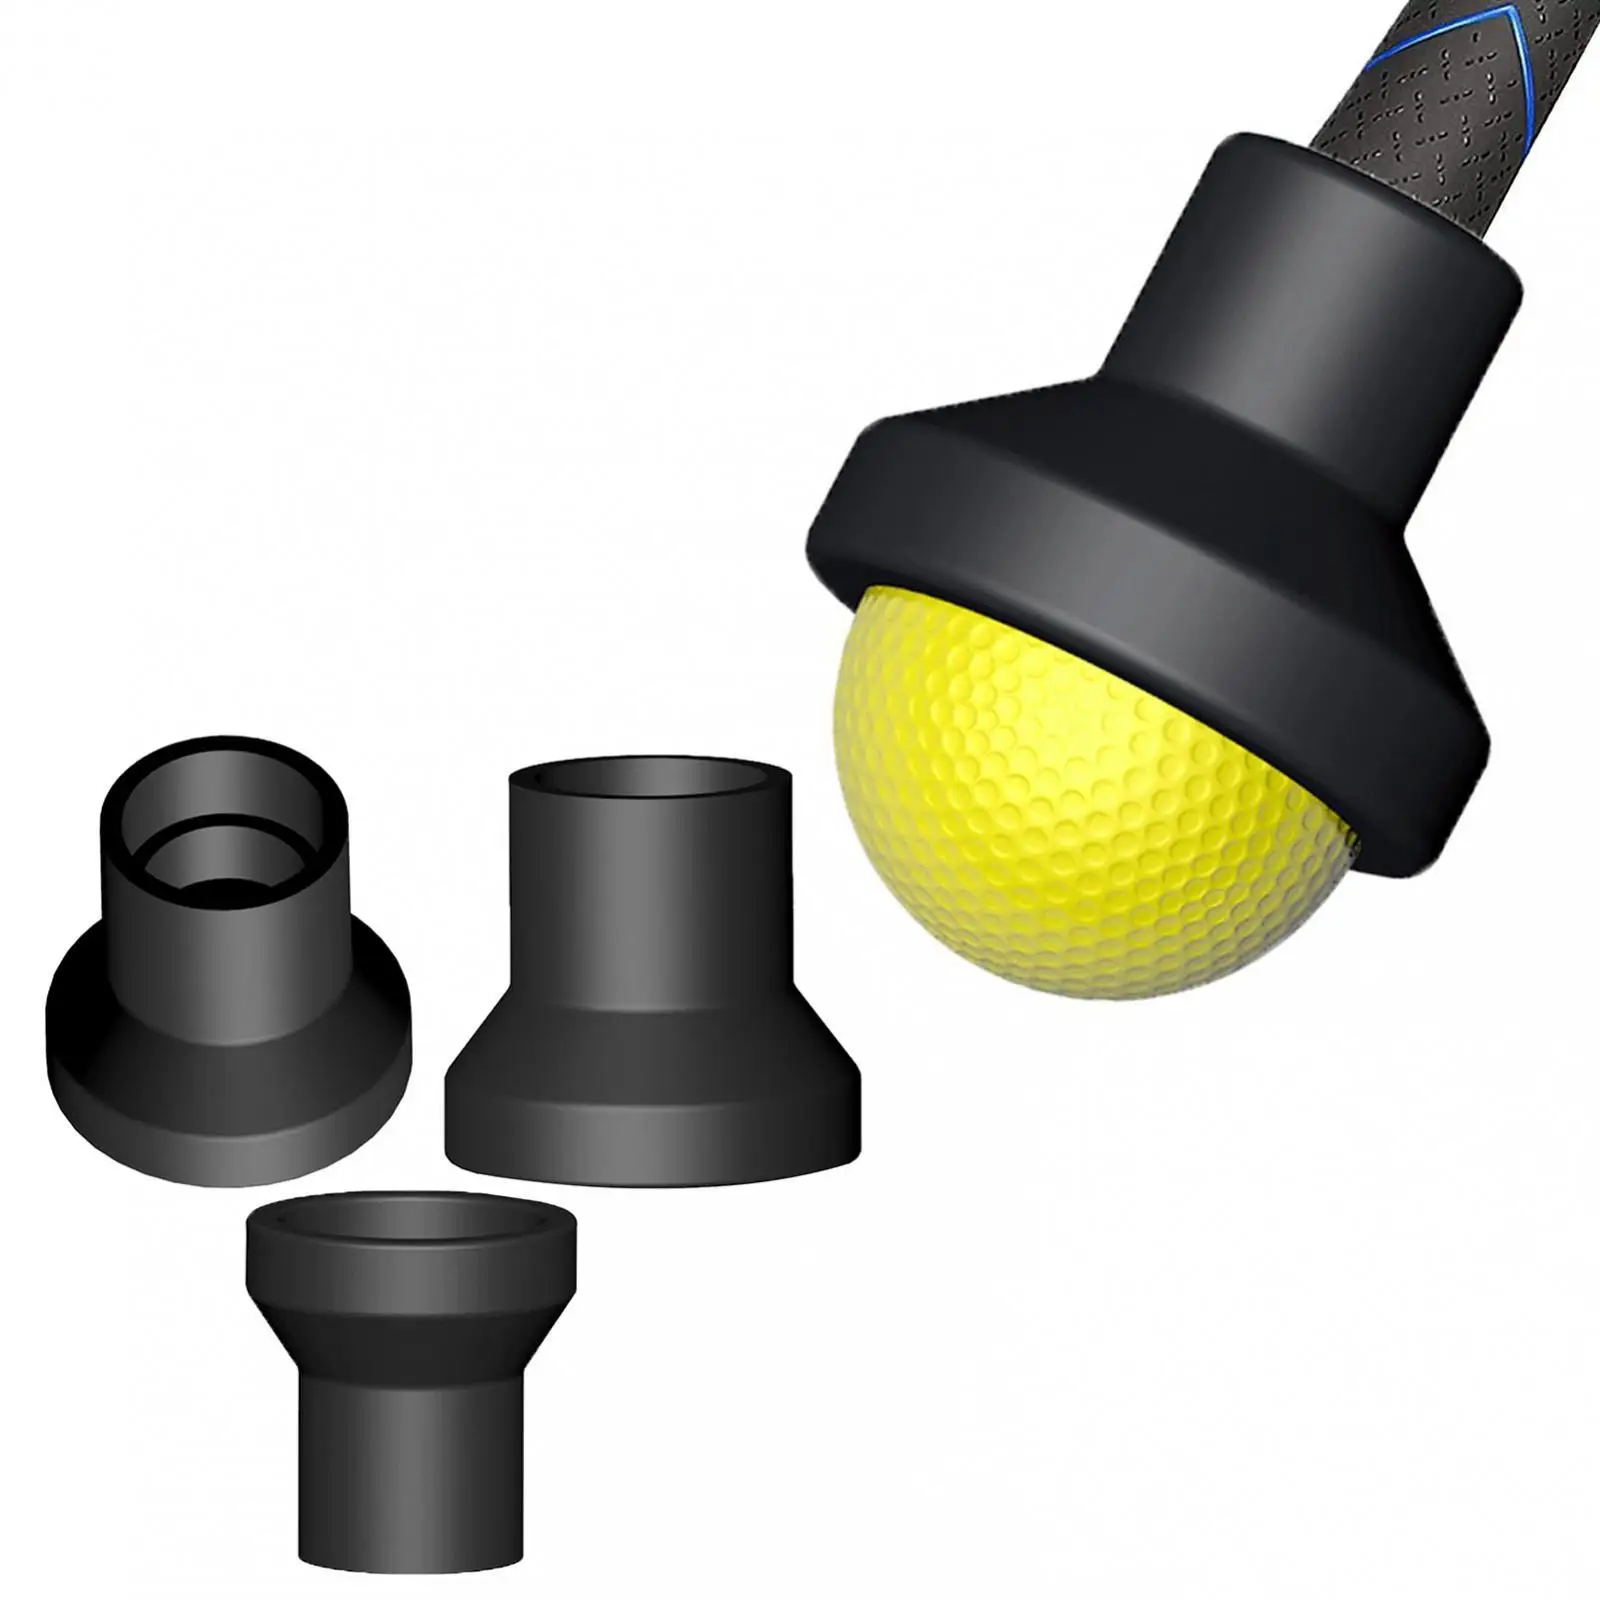 Professional Golf Ball Grabber Suction Cup Detachable Adjustable for Golf